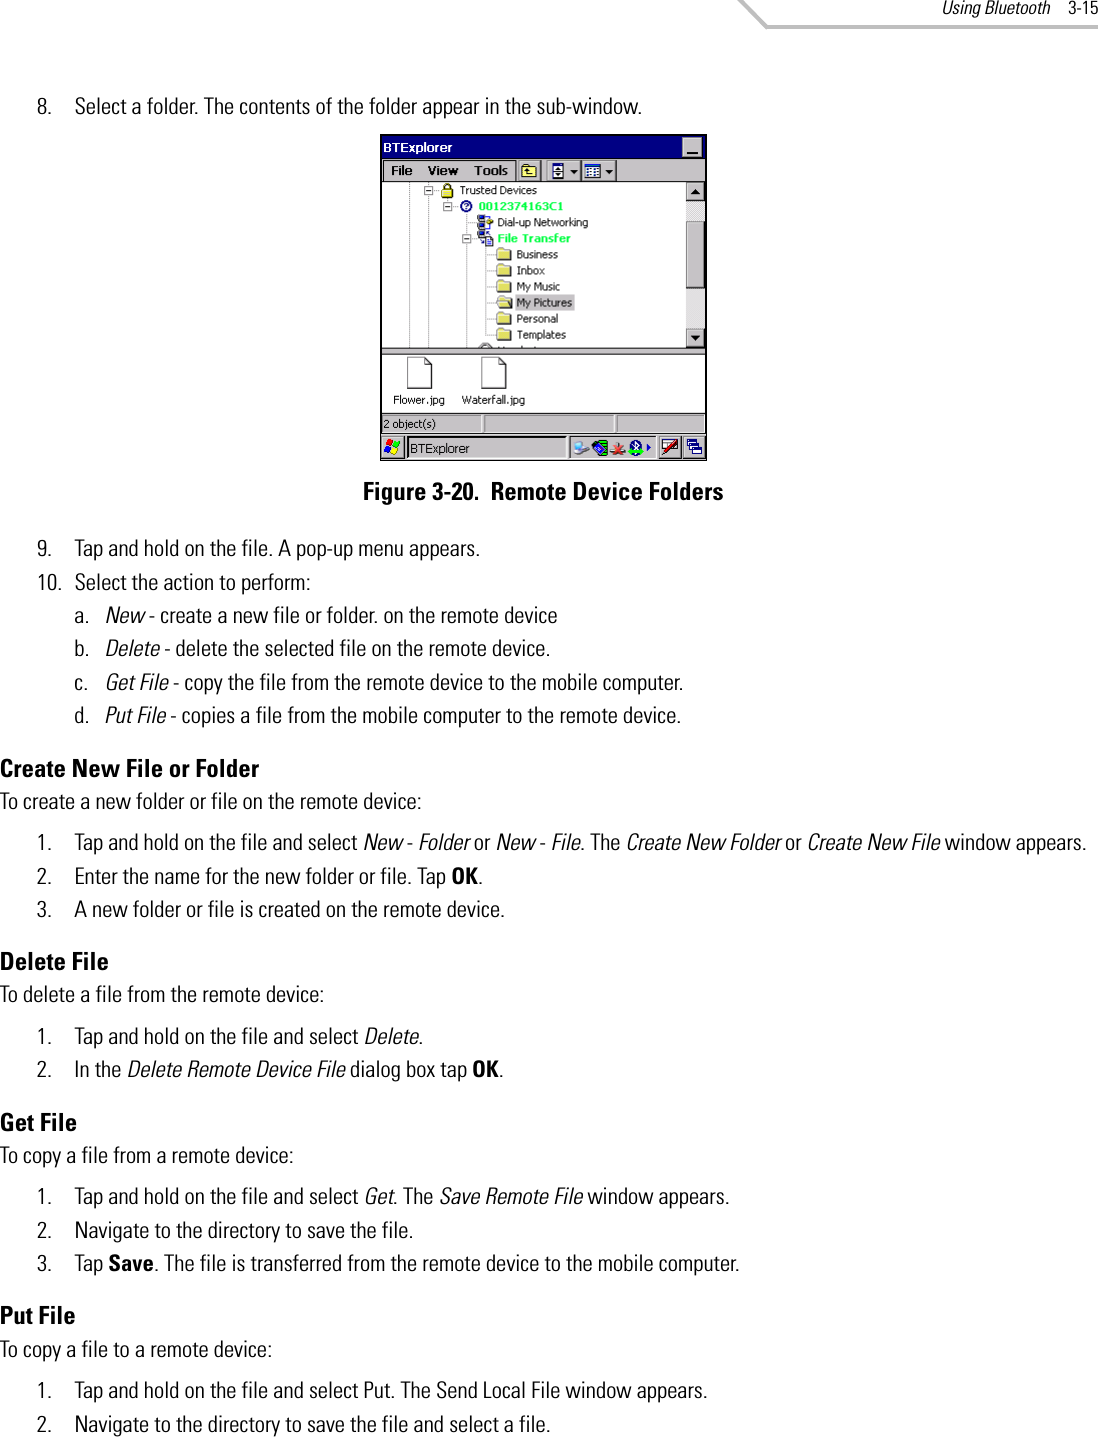 Using Bluetooth 3-158. Select a folder. The contents of the folder appear in the sub-window.Figure 3-20.  Remote Device Folders9. Tap and hold on the file. A pop-up menu appears.10. Select the action to perform:a. New - create a new file or folder. on the remote deviceb. Delete - delete the selected file on the remote device.c. Get File - copy the file from the remote device to the mobile computer.d. Put File - copies a file from the mobile computer to the remote device.Create New File or FolderTo create a new folder or file on the remote device:1. Tap and hold on the file and select New - Folder or New - File. The Create New Folder or Create New File window appears.2. Enter the name for the new folder or file. Tap OK.3. A new folder or file is created on the remote device.Delete FileTo delete a file from the remote device:1. Tap and hold on the file and select Delete.2. In the Delete Remote Device File dialog box tap OK.Get FileTo copy a file from a remote device:1. Tap and hold on the file and select Get. The Save Remote File window appears.2. Navigate to the directory to save the file.3. Tap Save. The file is transferred from the remote device to the mobile computer.Put FileTo copy a file to a remote device:1. Tap and hold on the file and select Put. The Send Local File window appears.2. Navigate to the directory to save the file and select a file.